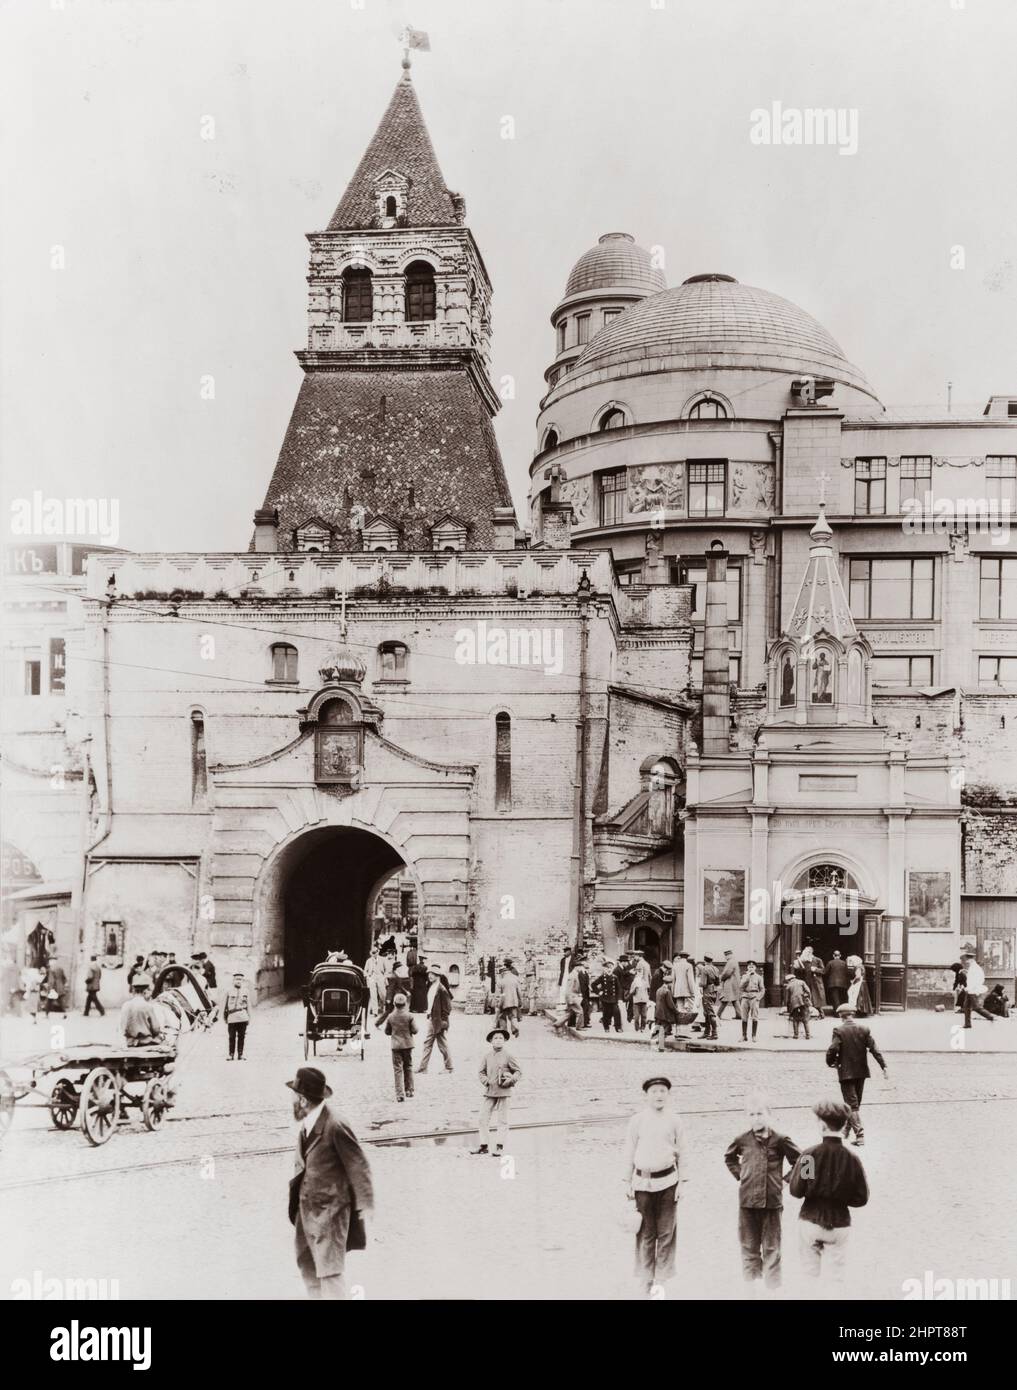 Vintage photo of the St Elijah's Gates to Kitay-gorod, with its Russian-style architecture and Gethsemane Chapel (Sergius of Radonezh chapel) adjoinin Stock Photo